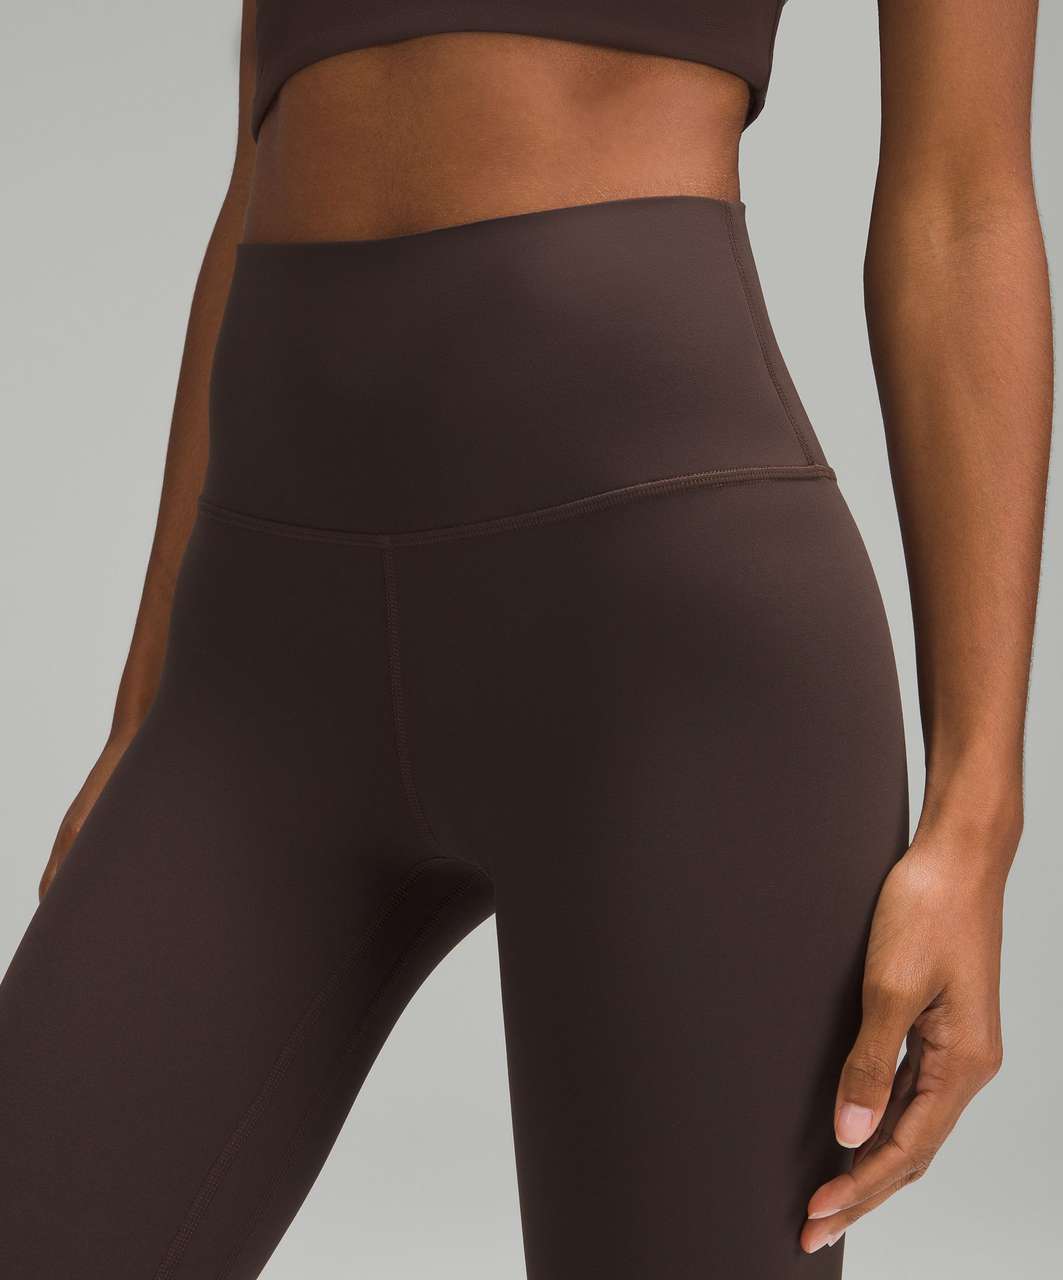 Lululemon Align High-Rise Pant 28" - Espresso (First Release)